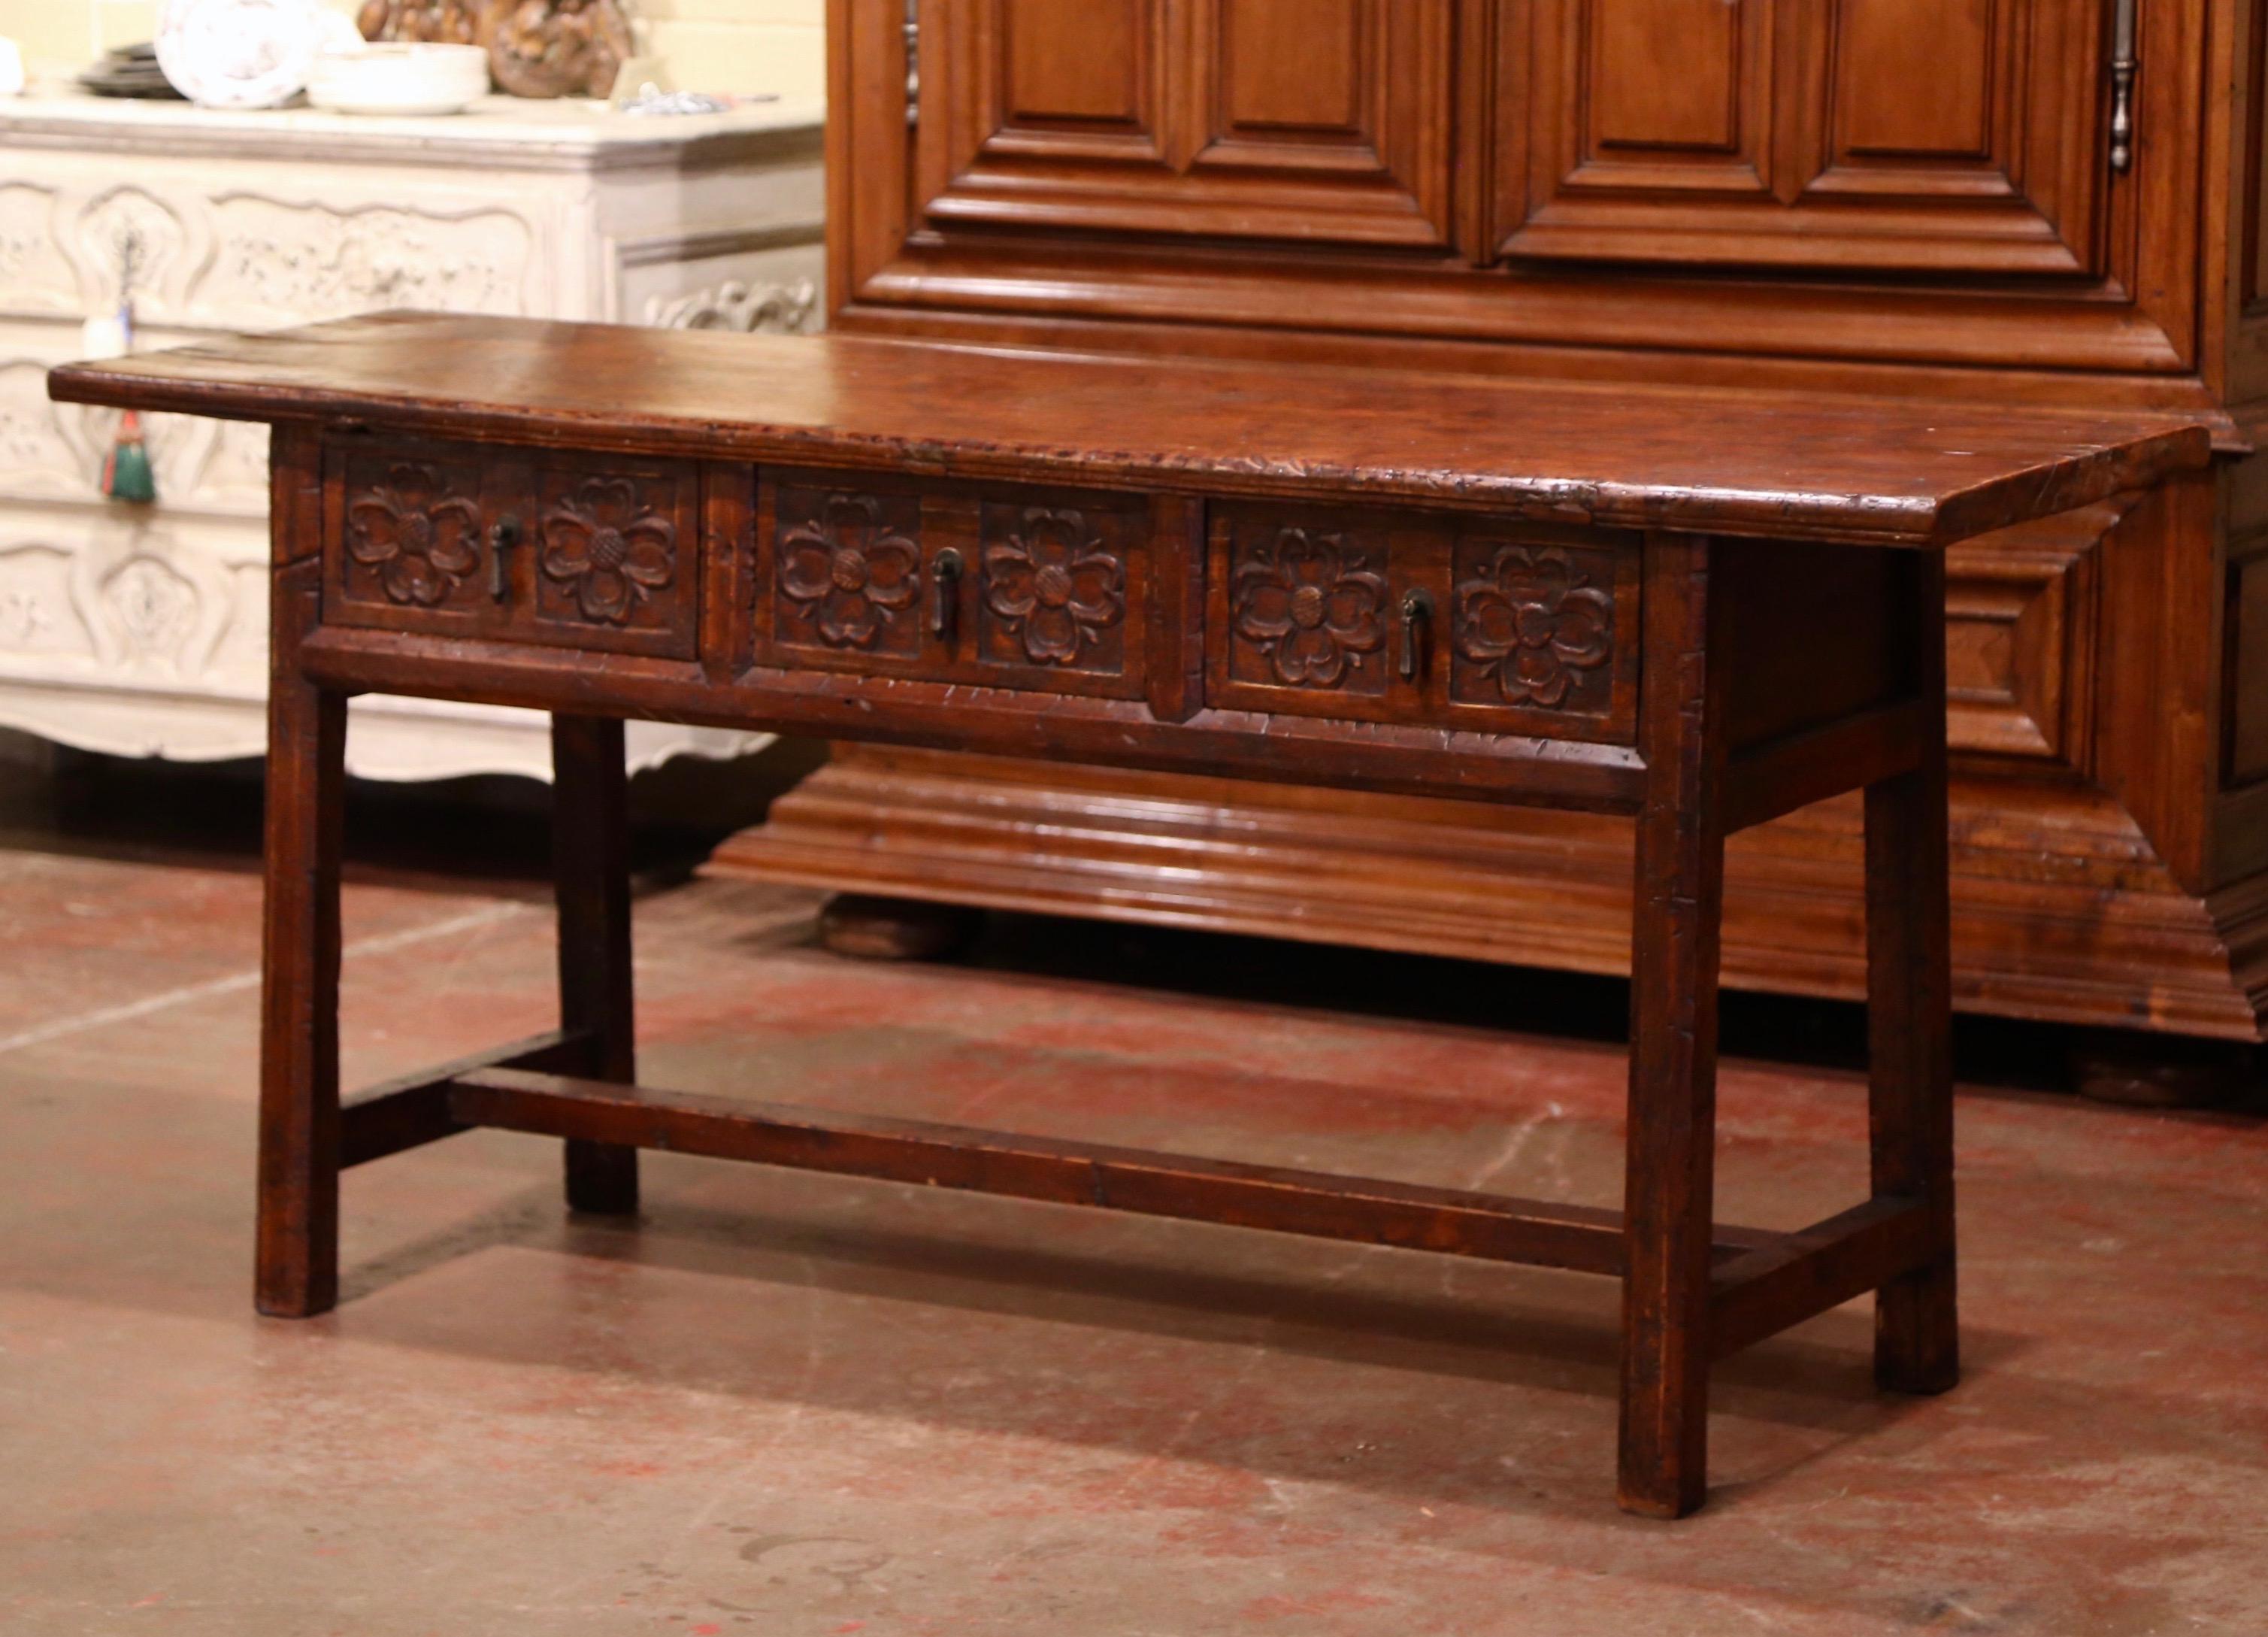 Patinated 19th Century Spanish Colonial Carved Walnut Console Table with Drawers